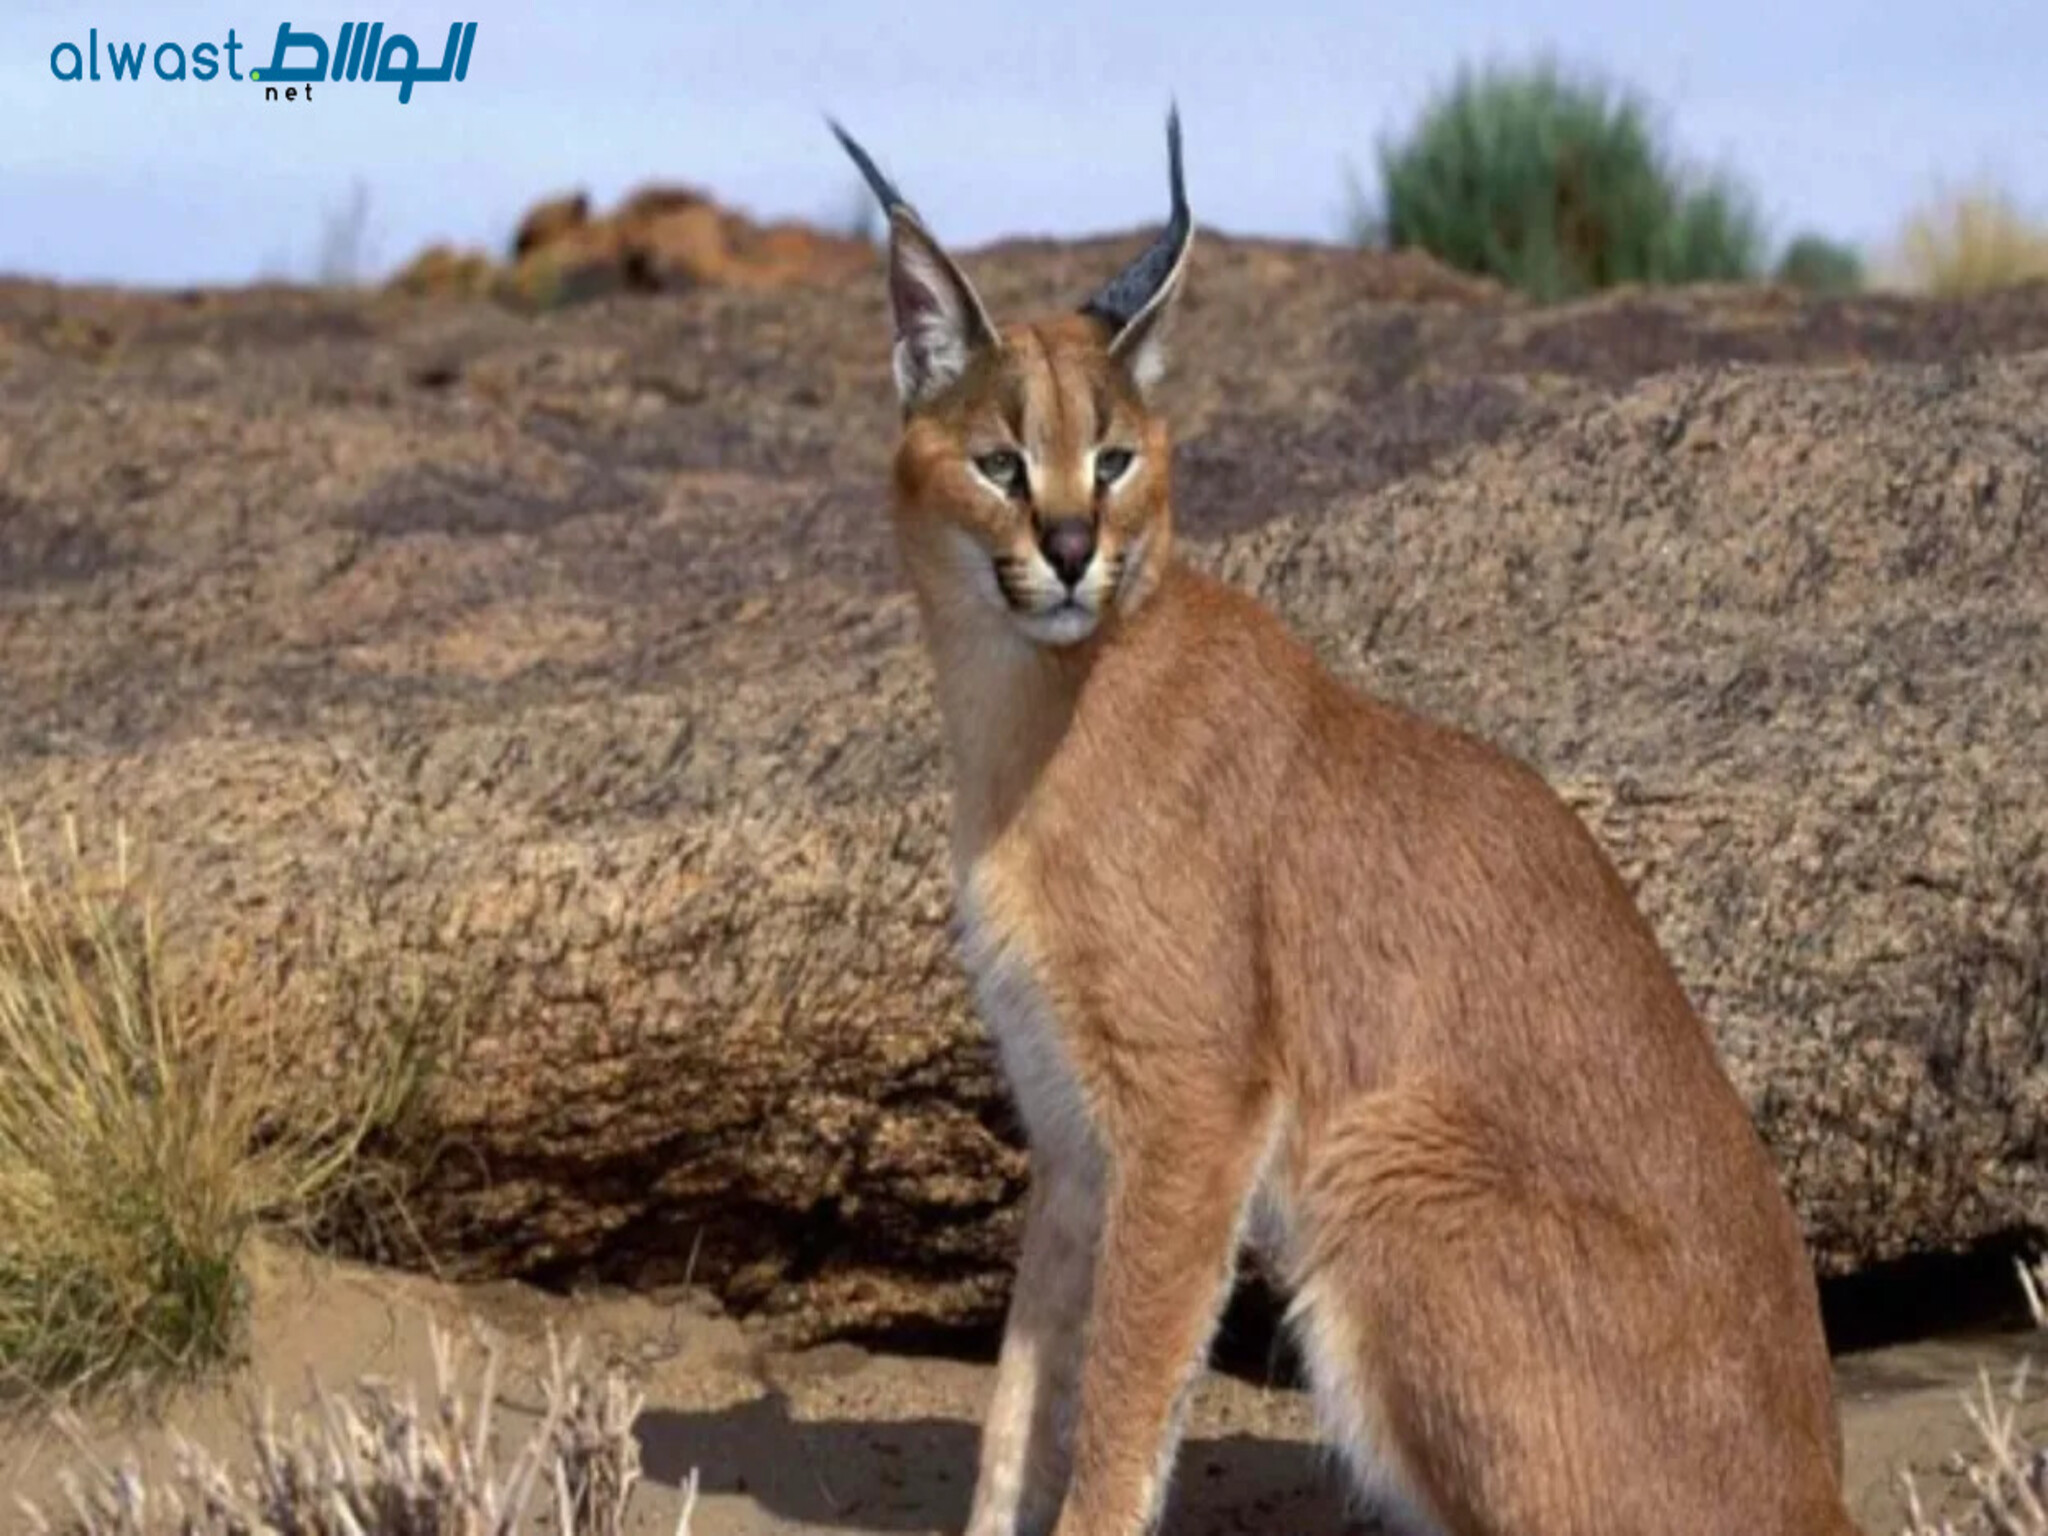 The UAE Fujairah Environment Authority successfully delivered "Lynx" to a zoo